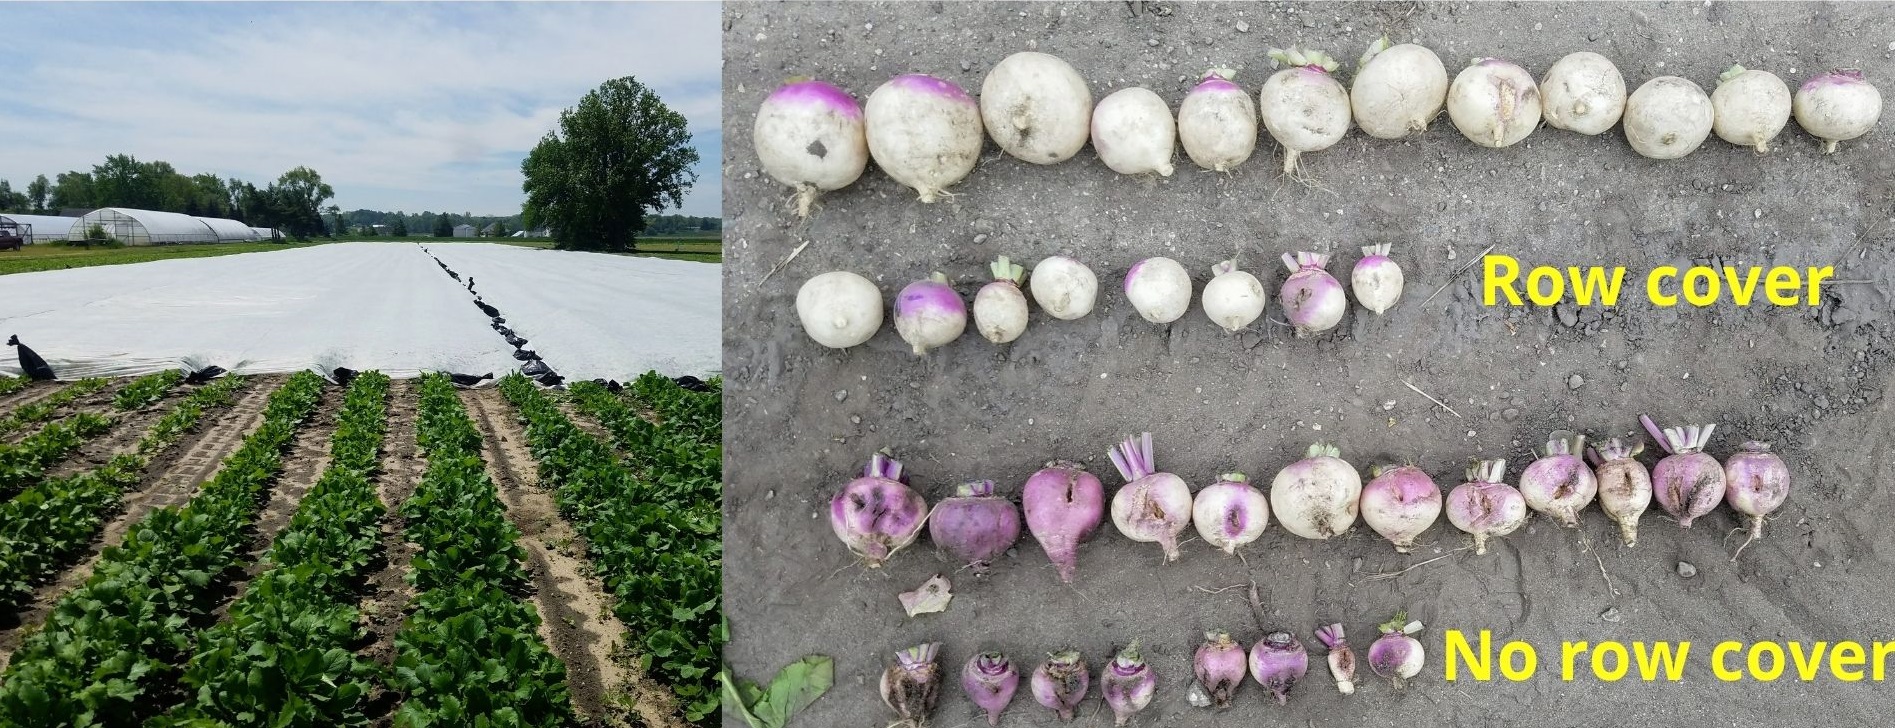 v-turnips and row cover